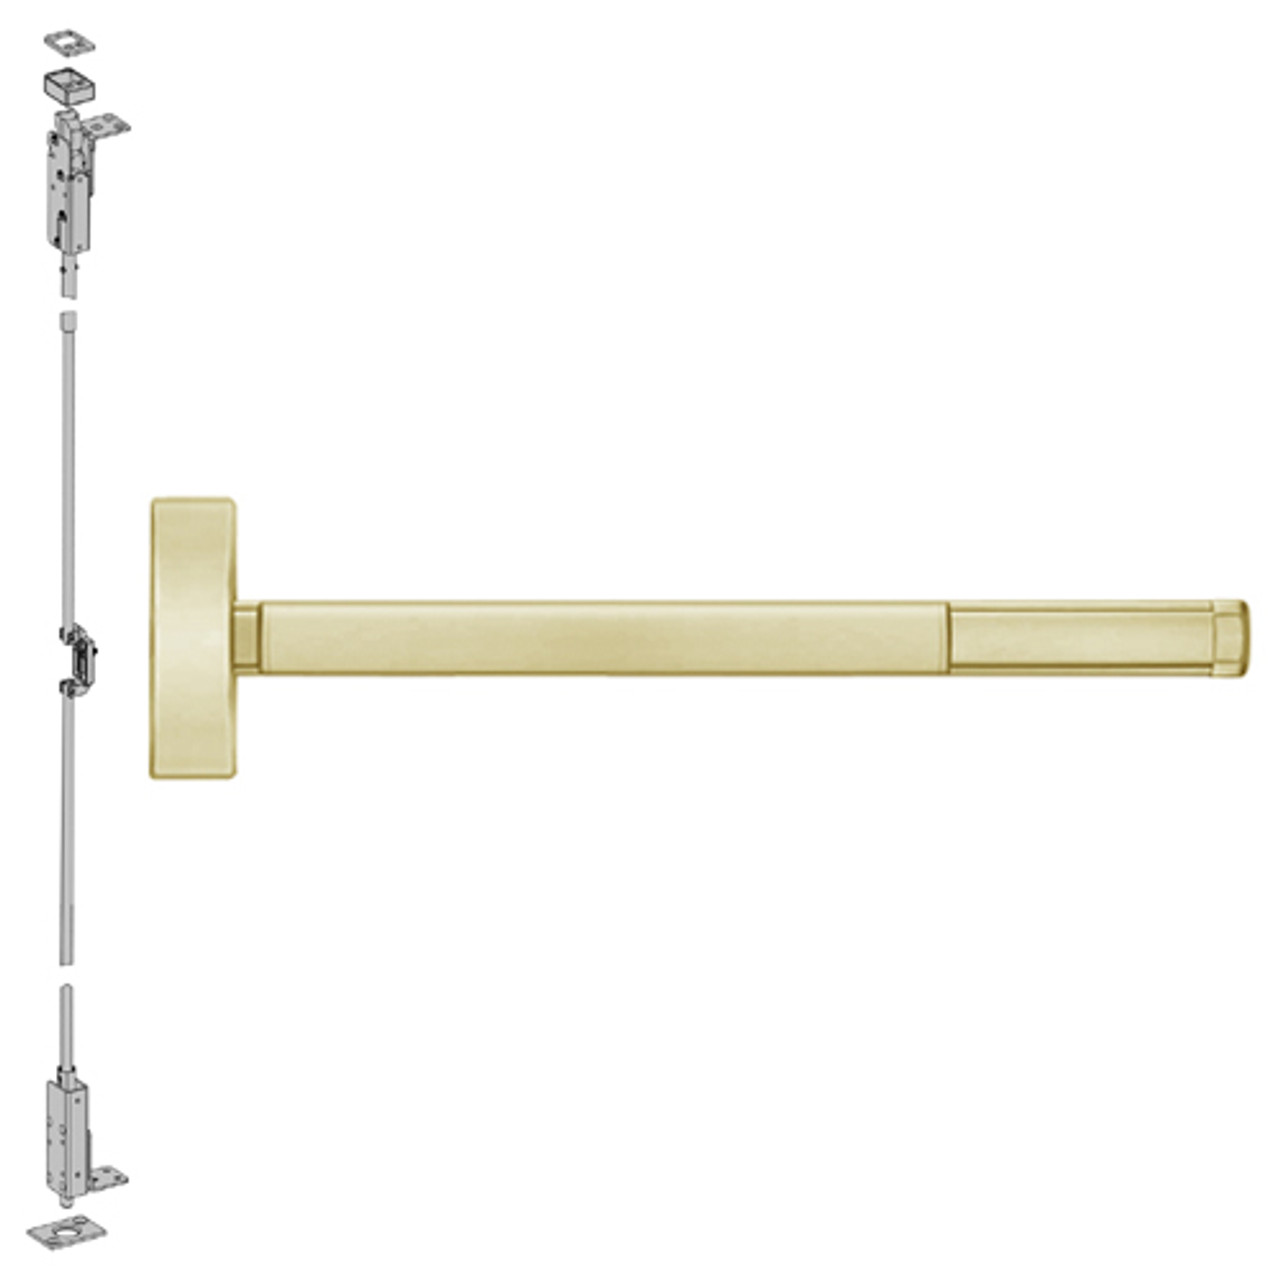 TS2714-606-48 PHI 2700 Series Wood Door Concealed Vertical Exit Device with Touchbar Monitoring Switch Prepped for Lever-Knob Always Active in Satin Brass